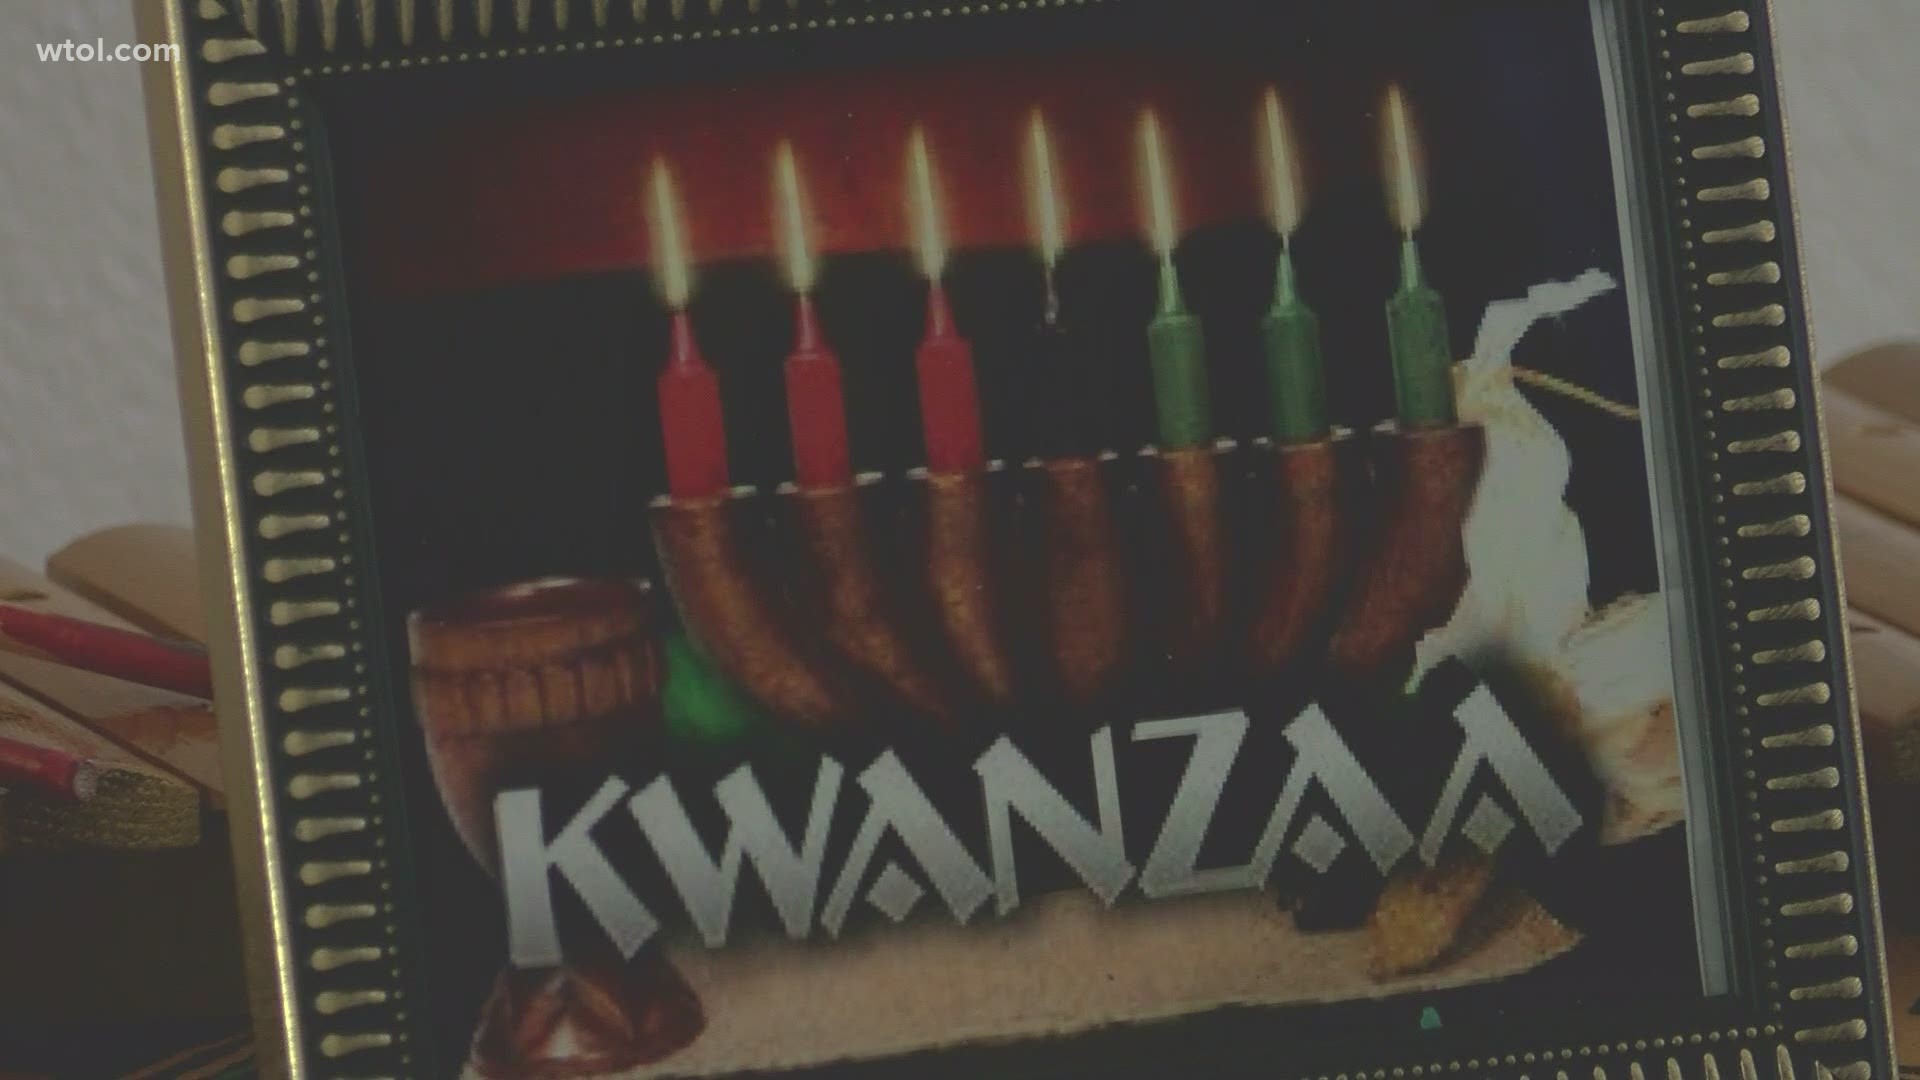 Toledo Kwanzaa house has been taking part of Kwanzaa celebrations for more than 40 years